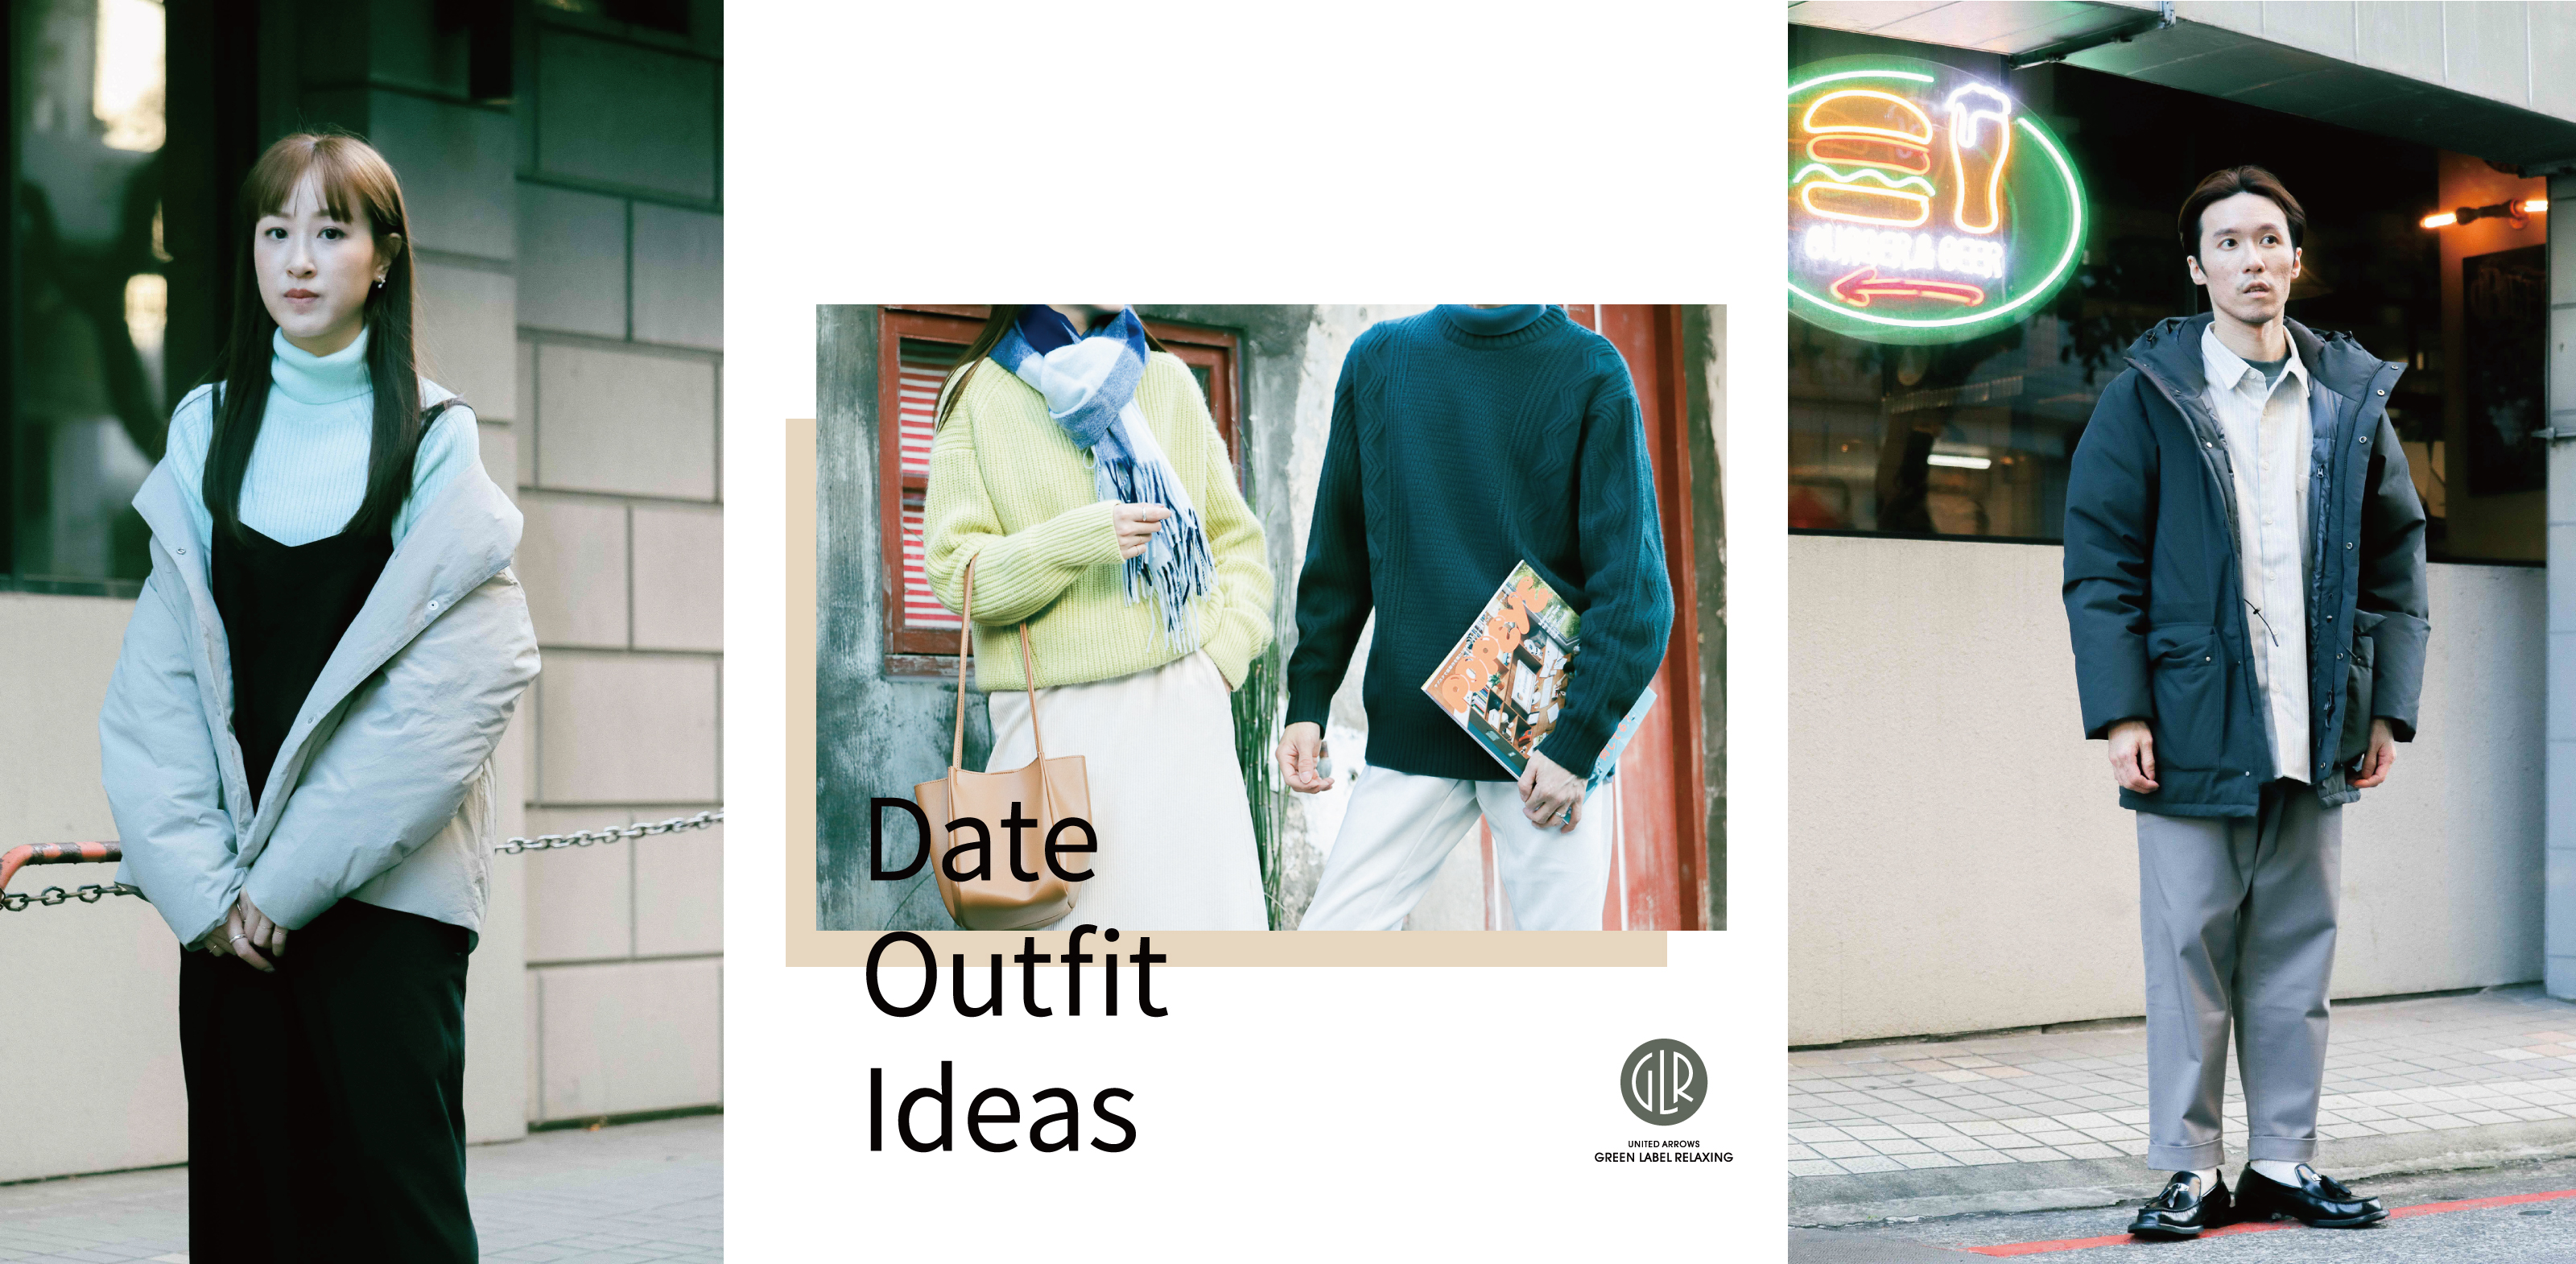 Date Outfit Ideas 情侶穿搭特輯